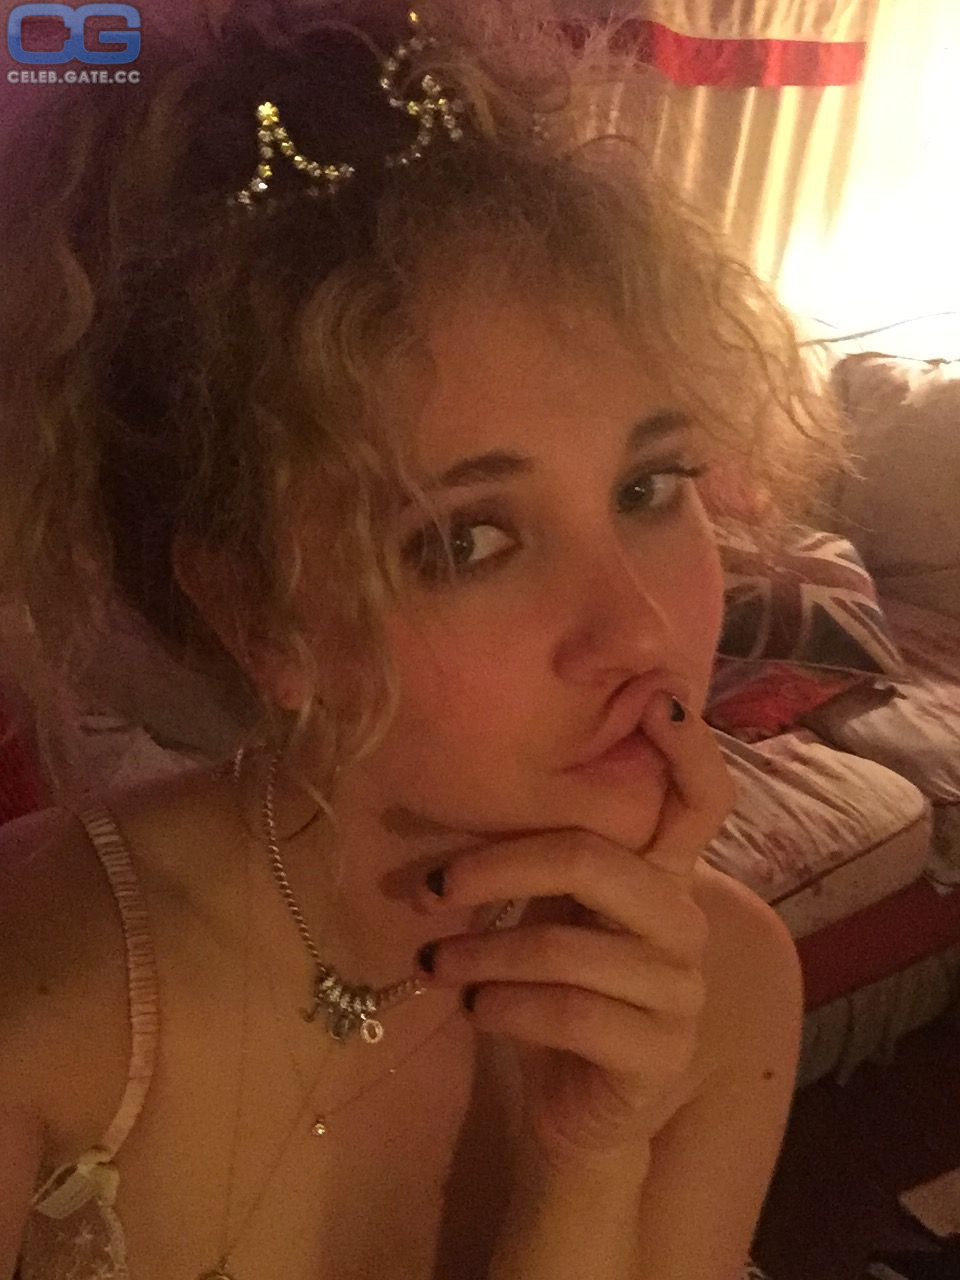 Juno Temple leaked photos